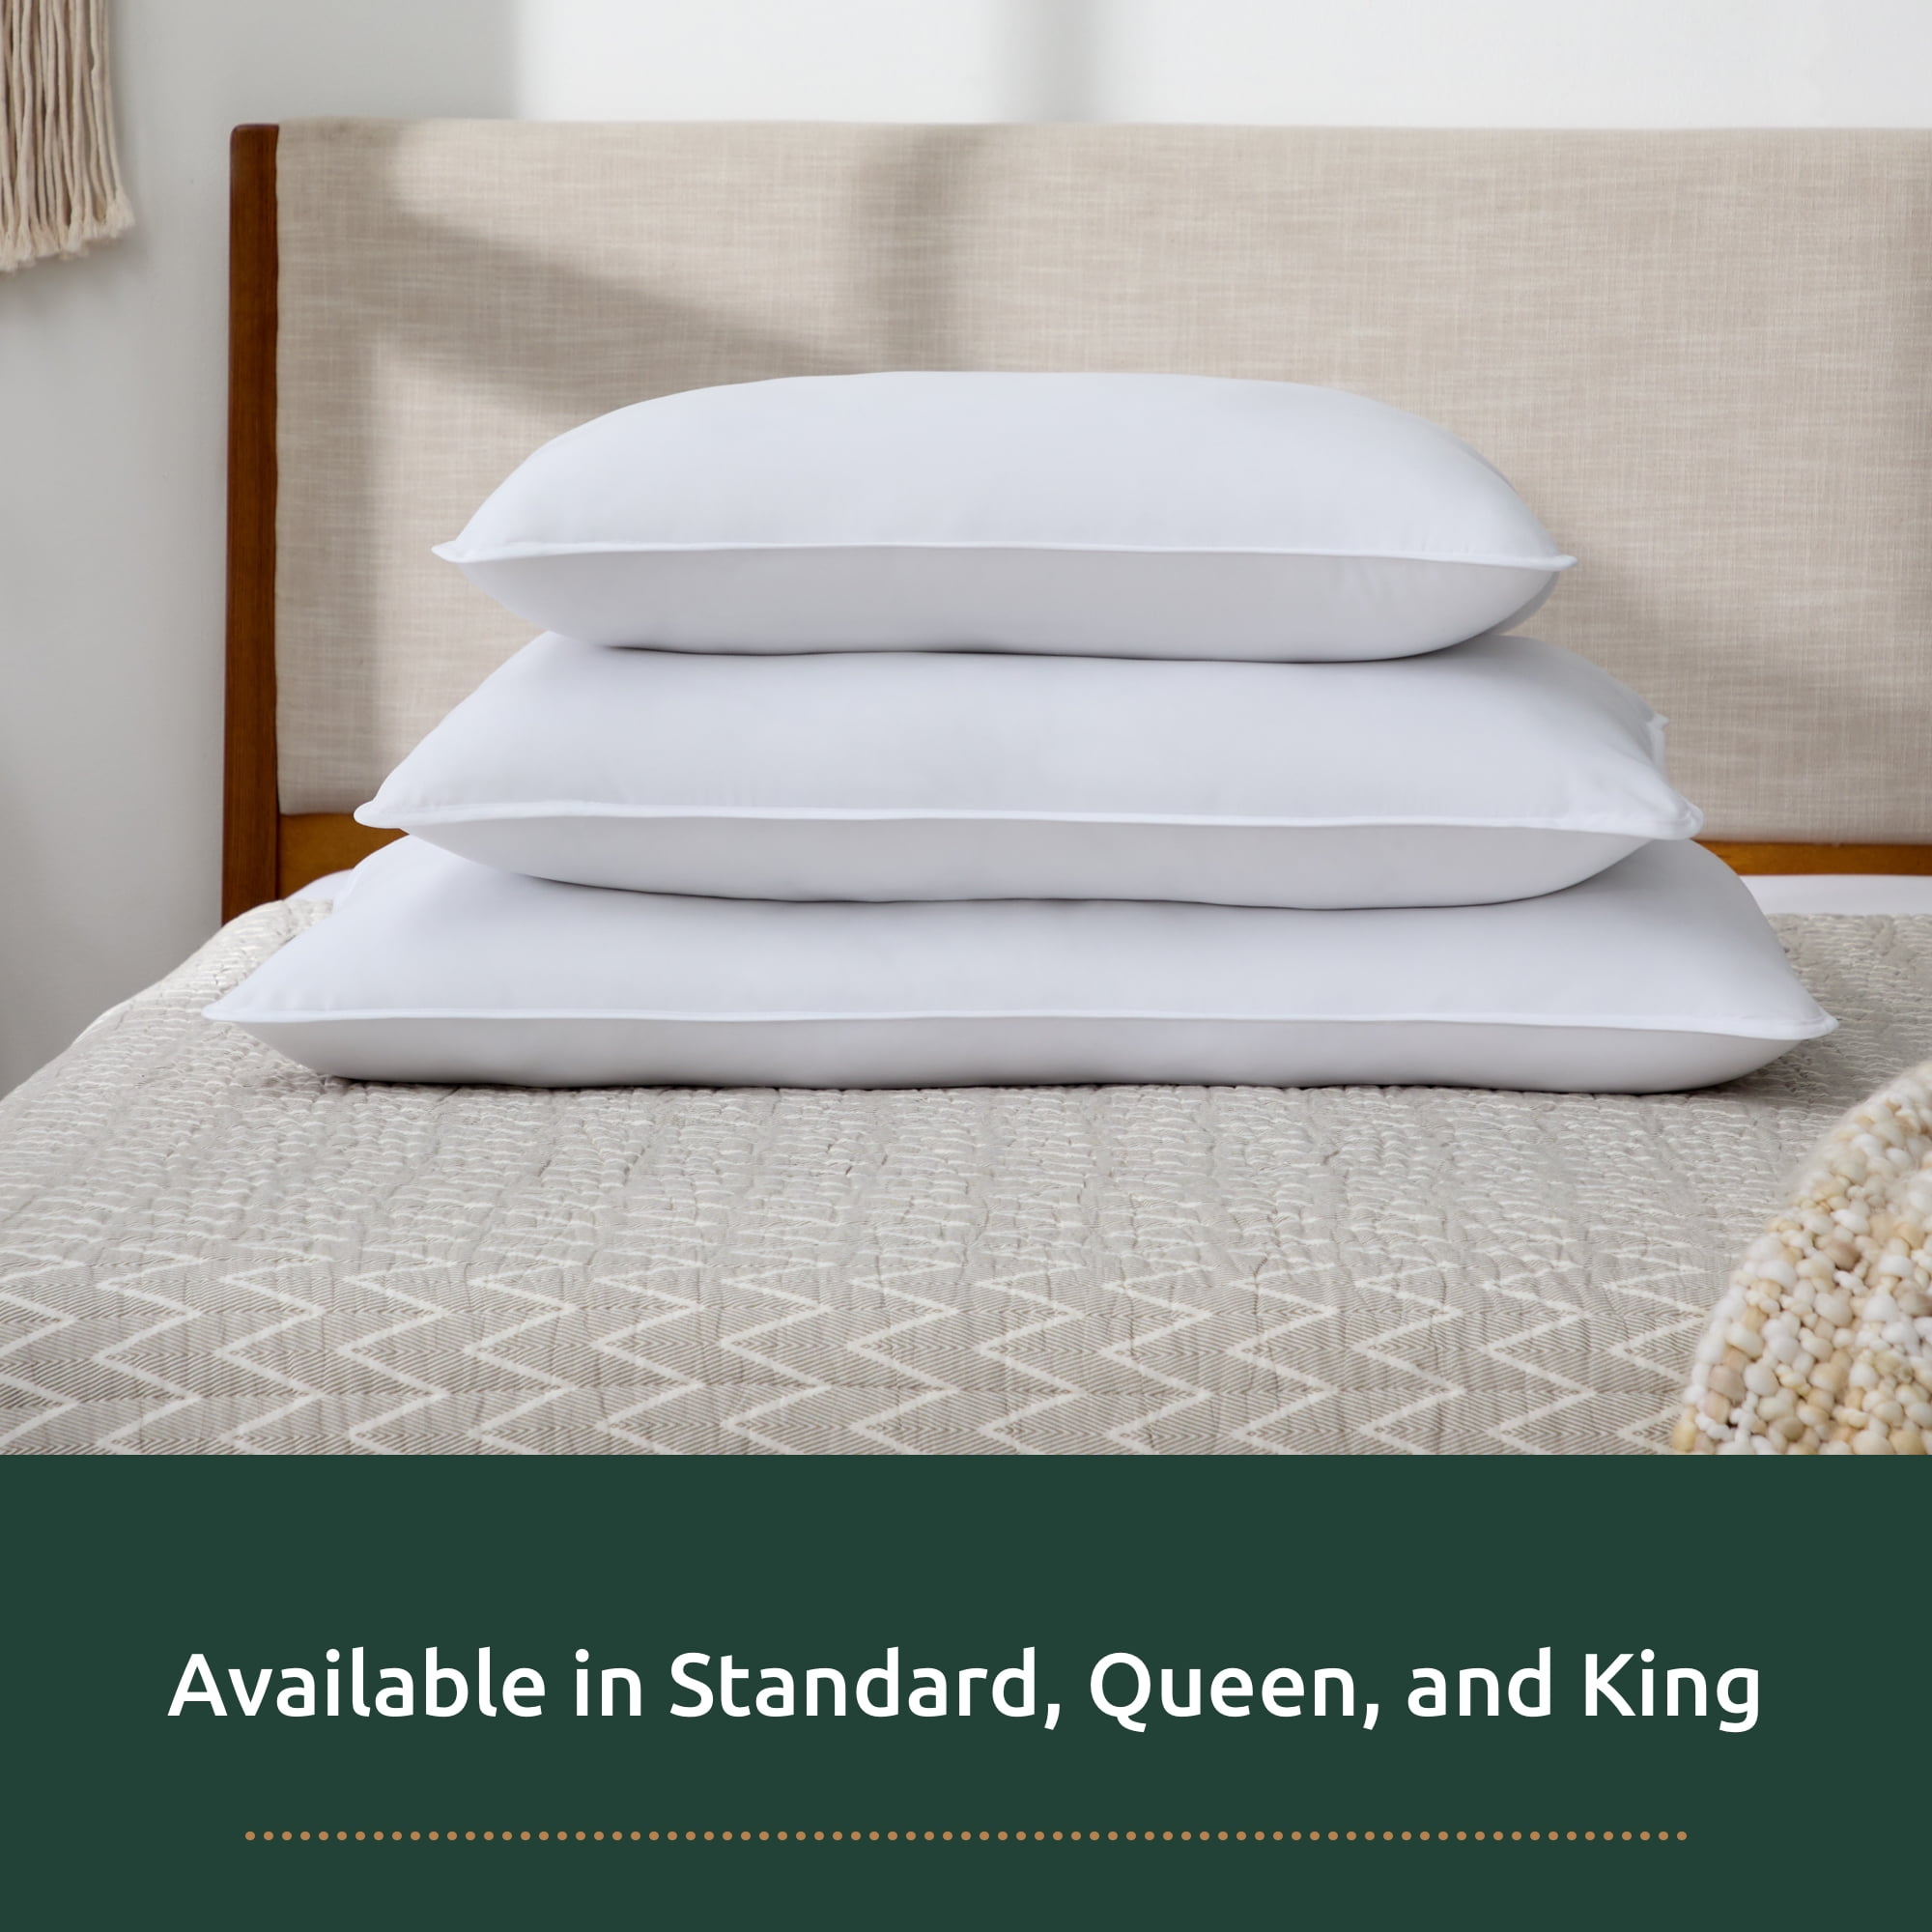 King Feather Bed Pillow - So Fluffy! : Target